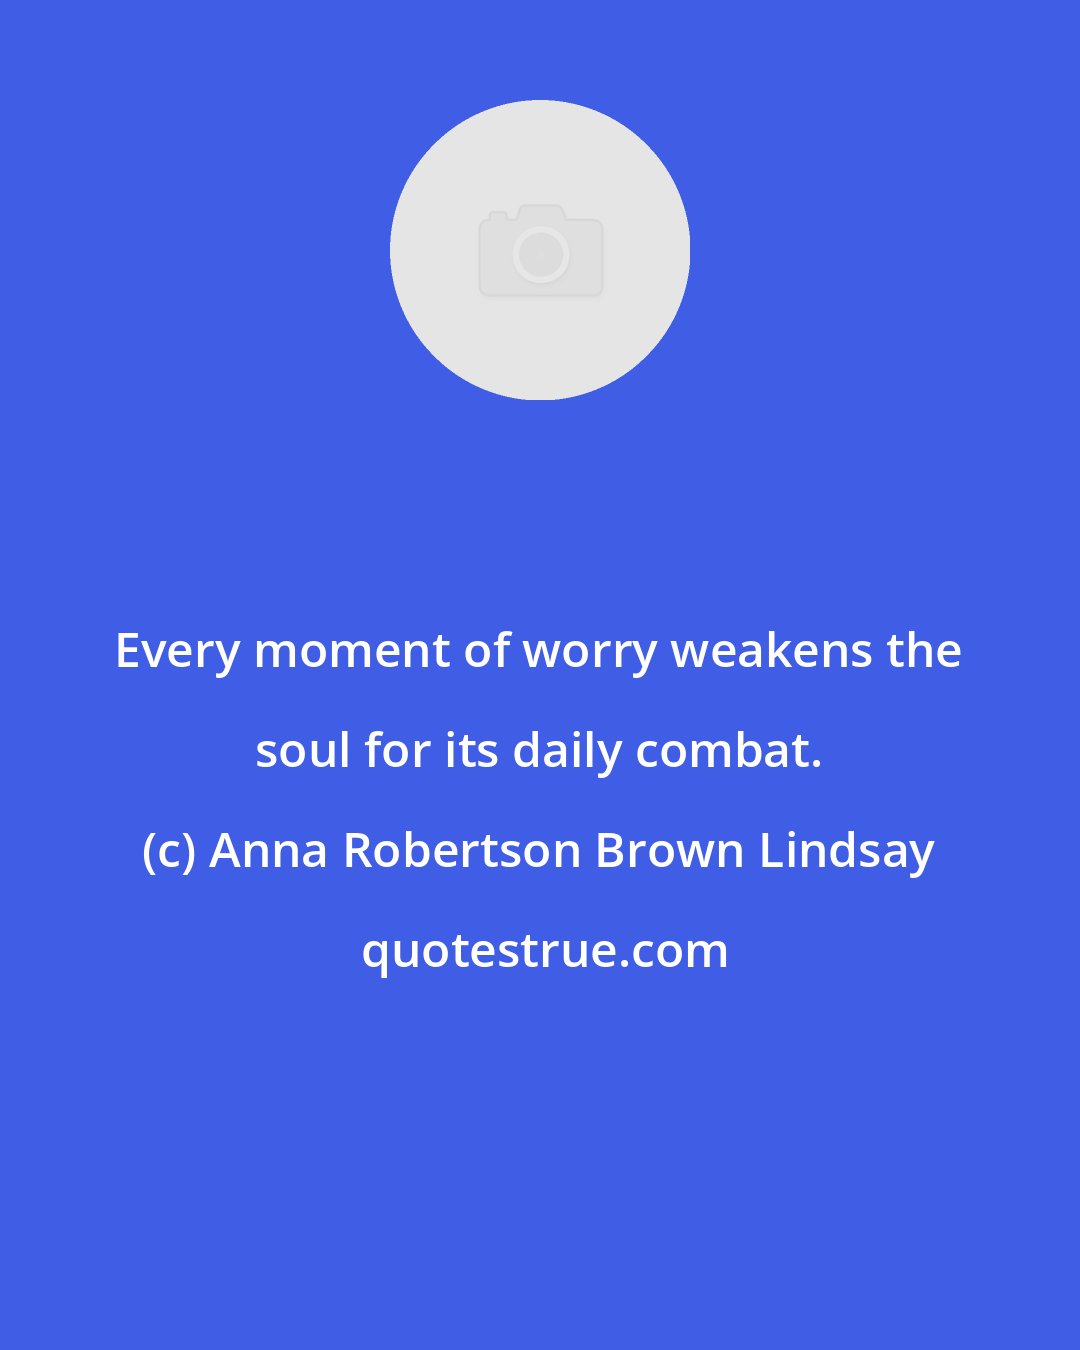 Anna Robertson Brown Lindsay: Every moment of worry weakens the soul for its daily combat.